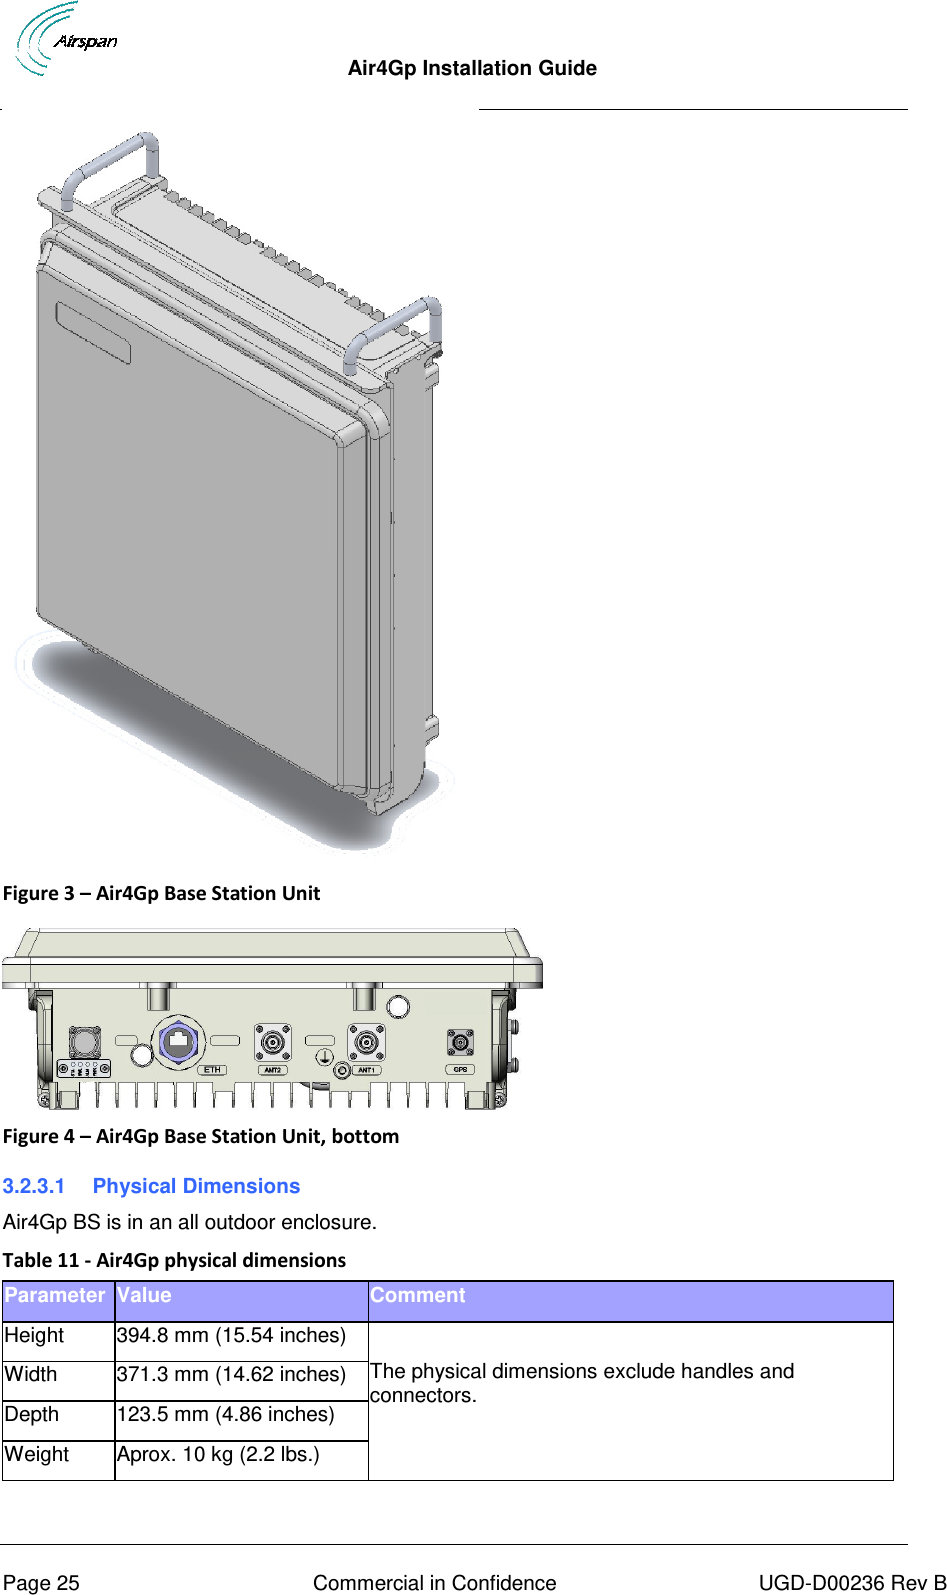  Air4Gp Installation Guide     Page 25  Commercial in Confidence  UGD-D00236 Rev B  Figure 3 – Air4Gp Base Station Unit   Figure 4 – Air4Gp Base Station Unit, bottom 3.2.3.1  Physical Dimensions Air4Gp BS is in an all outdoor enclosure. Table 11 - Air4Gp physical dimensions Parameter Value Comment Height 394.8 mm (15.54 inches)  The physical dimensions exclude handles and connectors. Width 371.3 mm (14.62 inches) Depth 123.5 mm (4.86 inches) Weight Aprox. 10 kg (2.2 lbs.)  